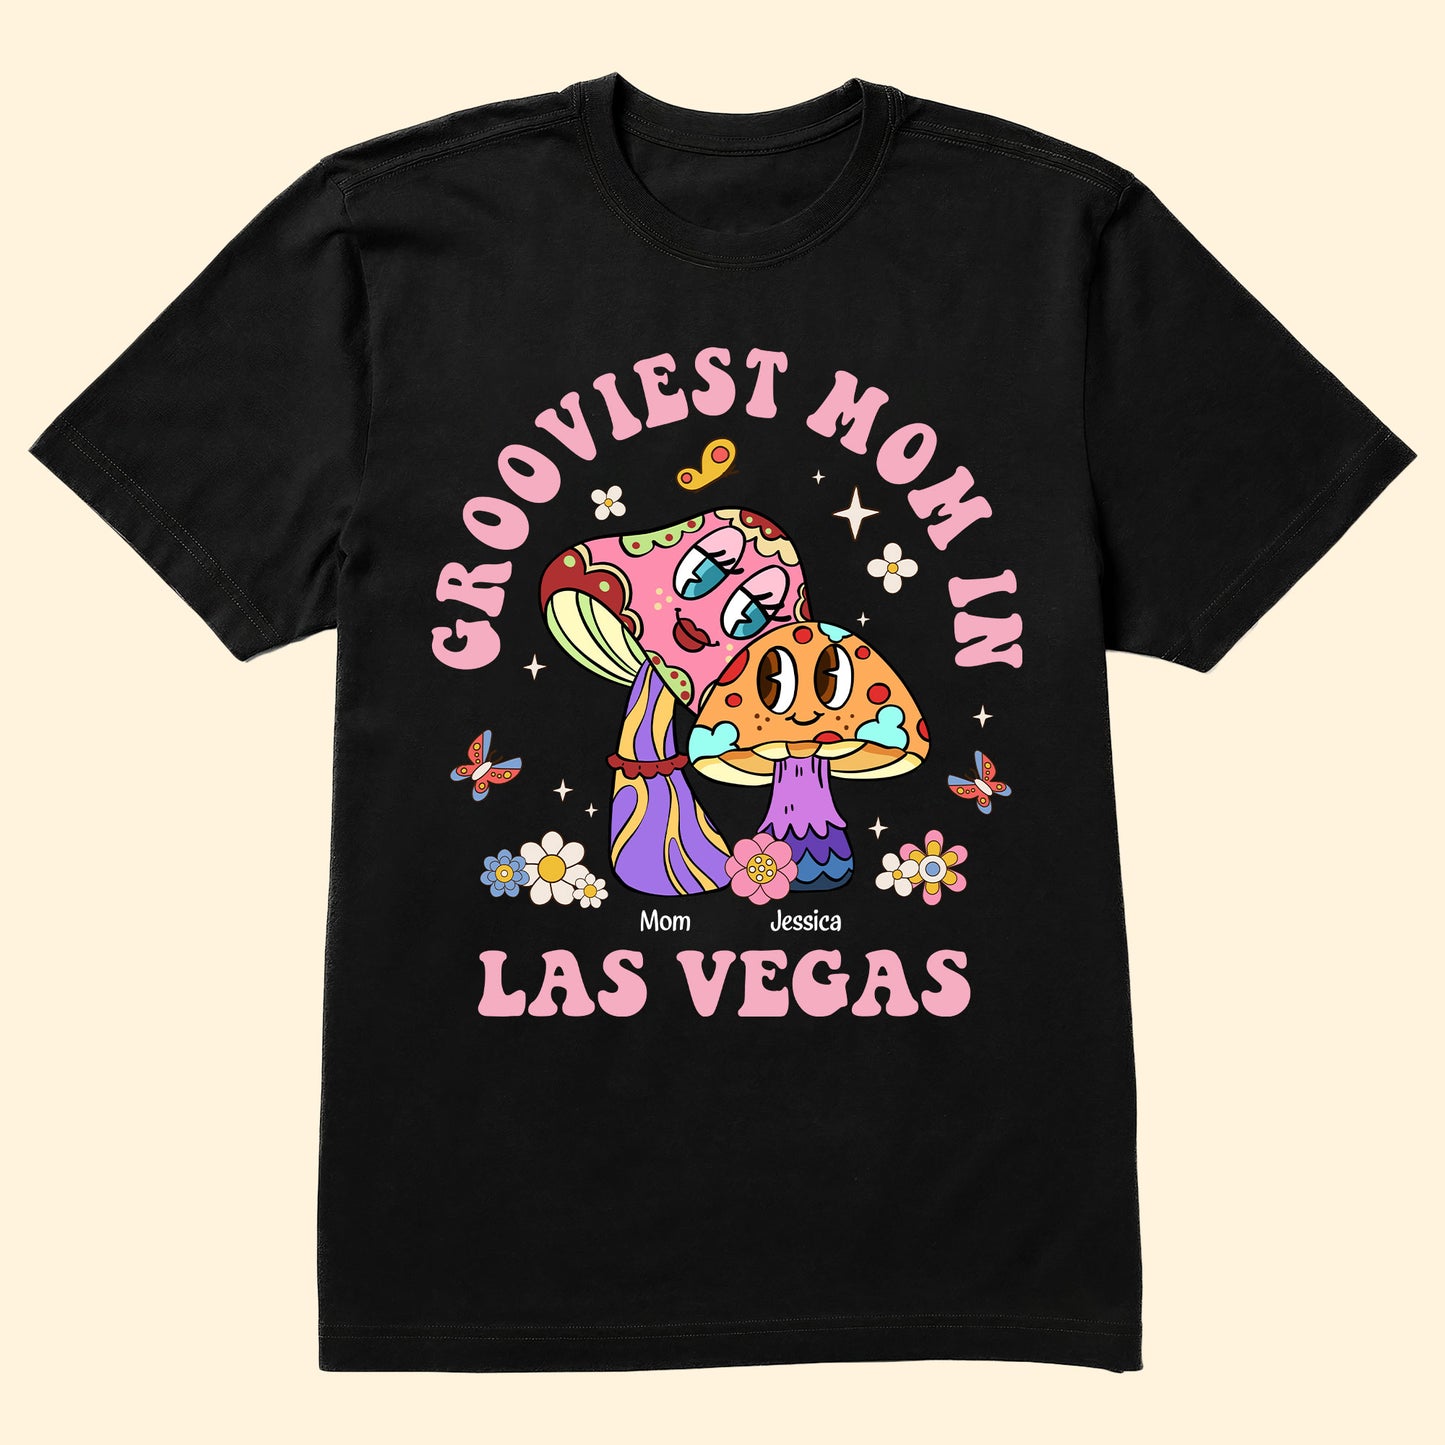 Grooviest Mom - Personalized Shirt